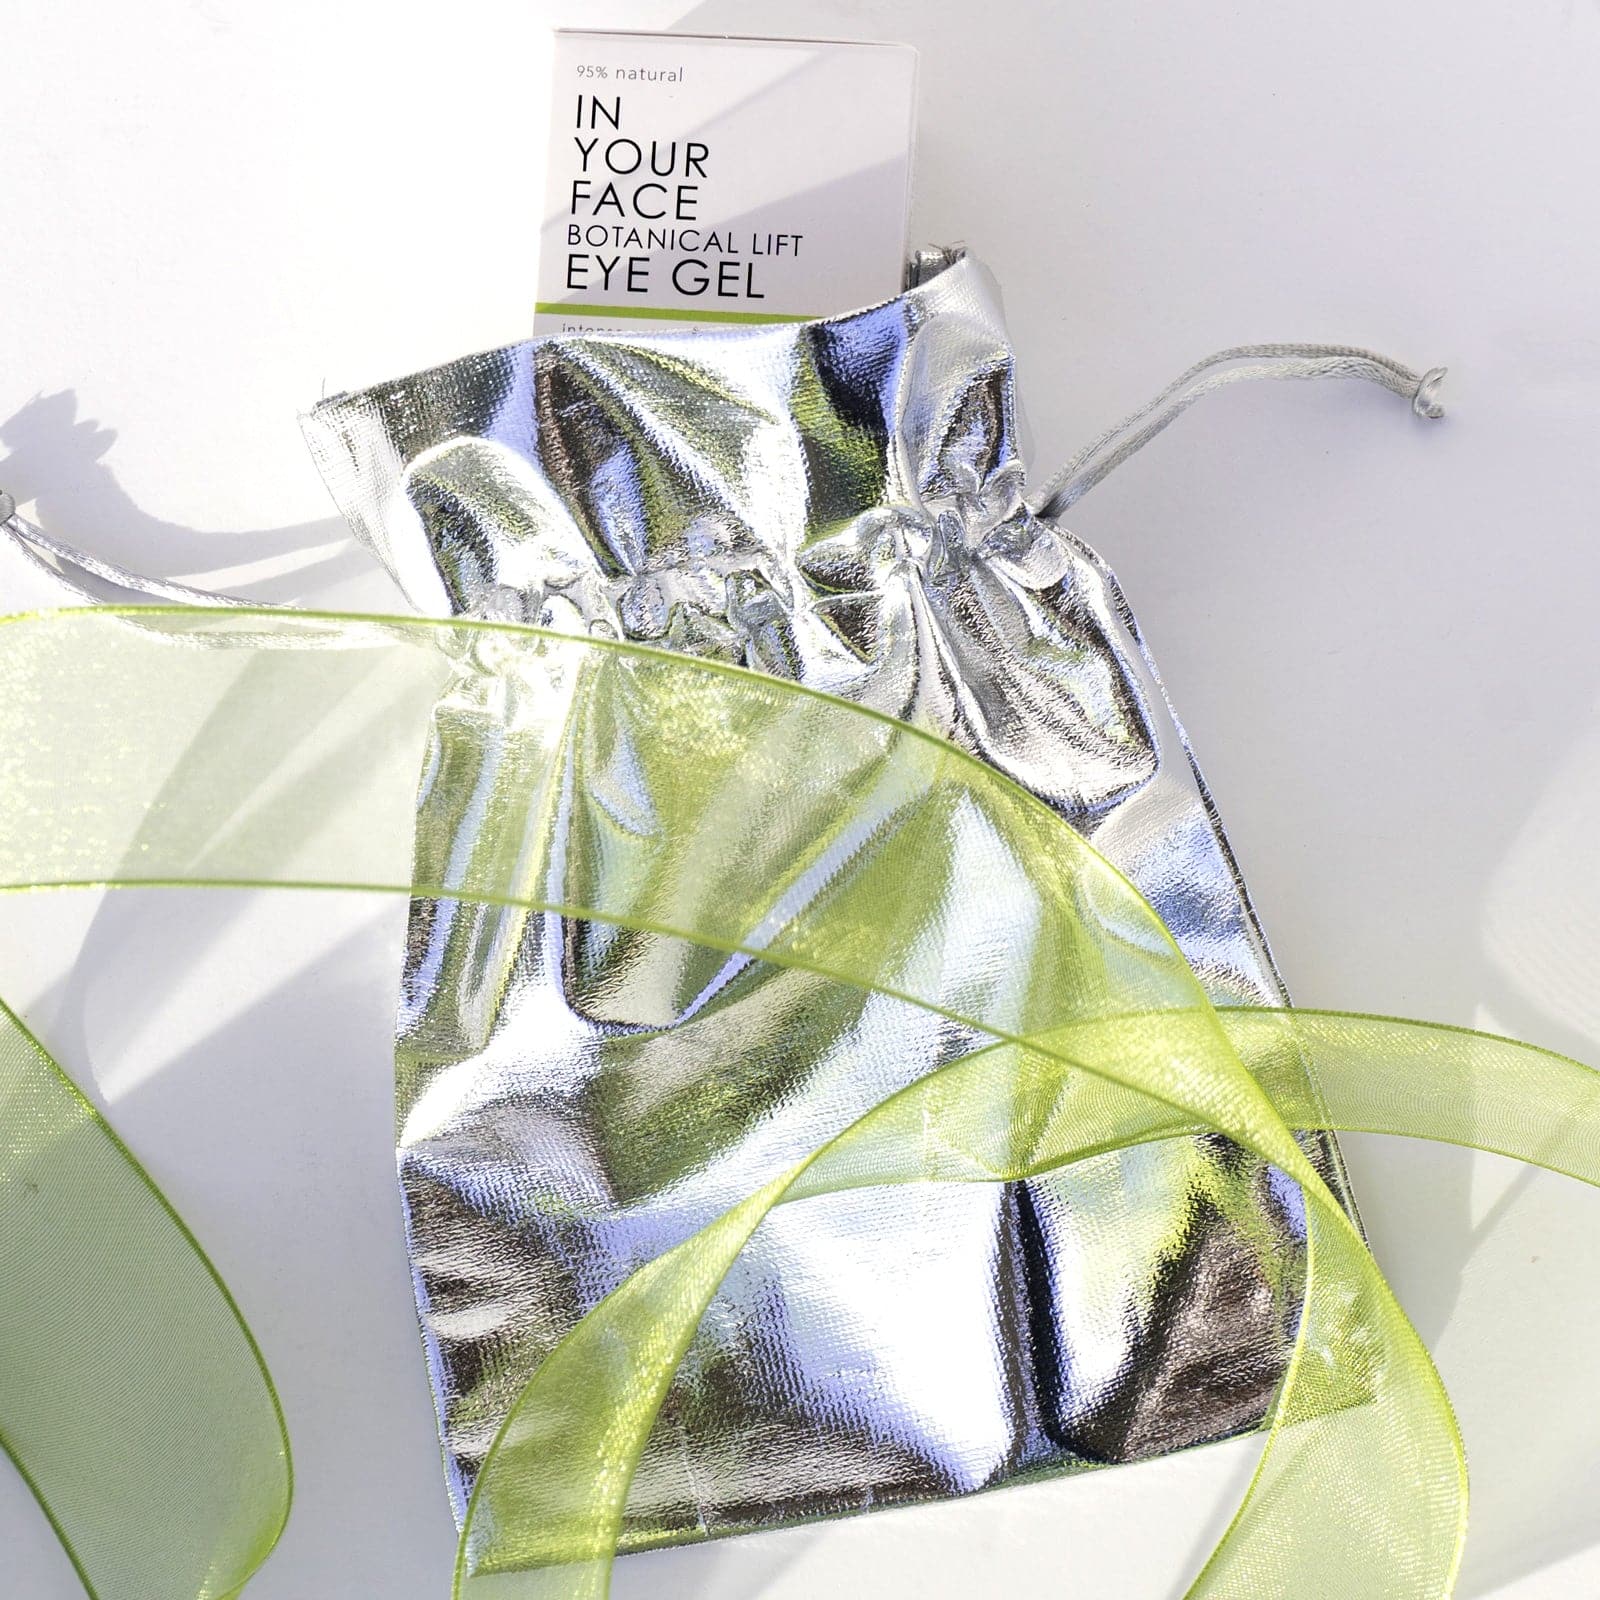 an image of a metallic gift bag with a box of IN YOUR FACE BOTANICAL LIFT EYE GEL popping out. A light green ribbon is wrapped around the bag.